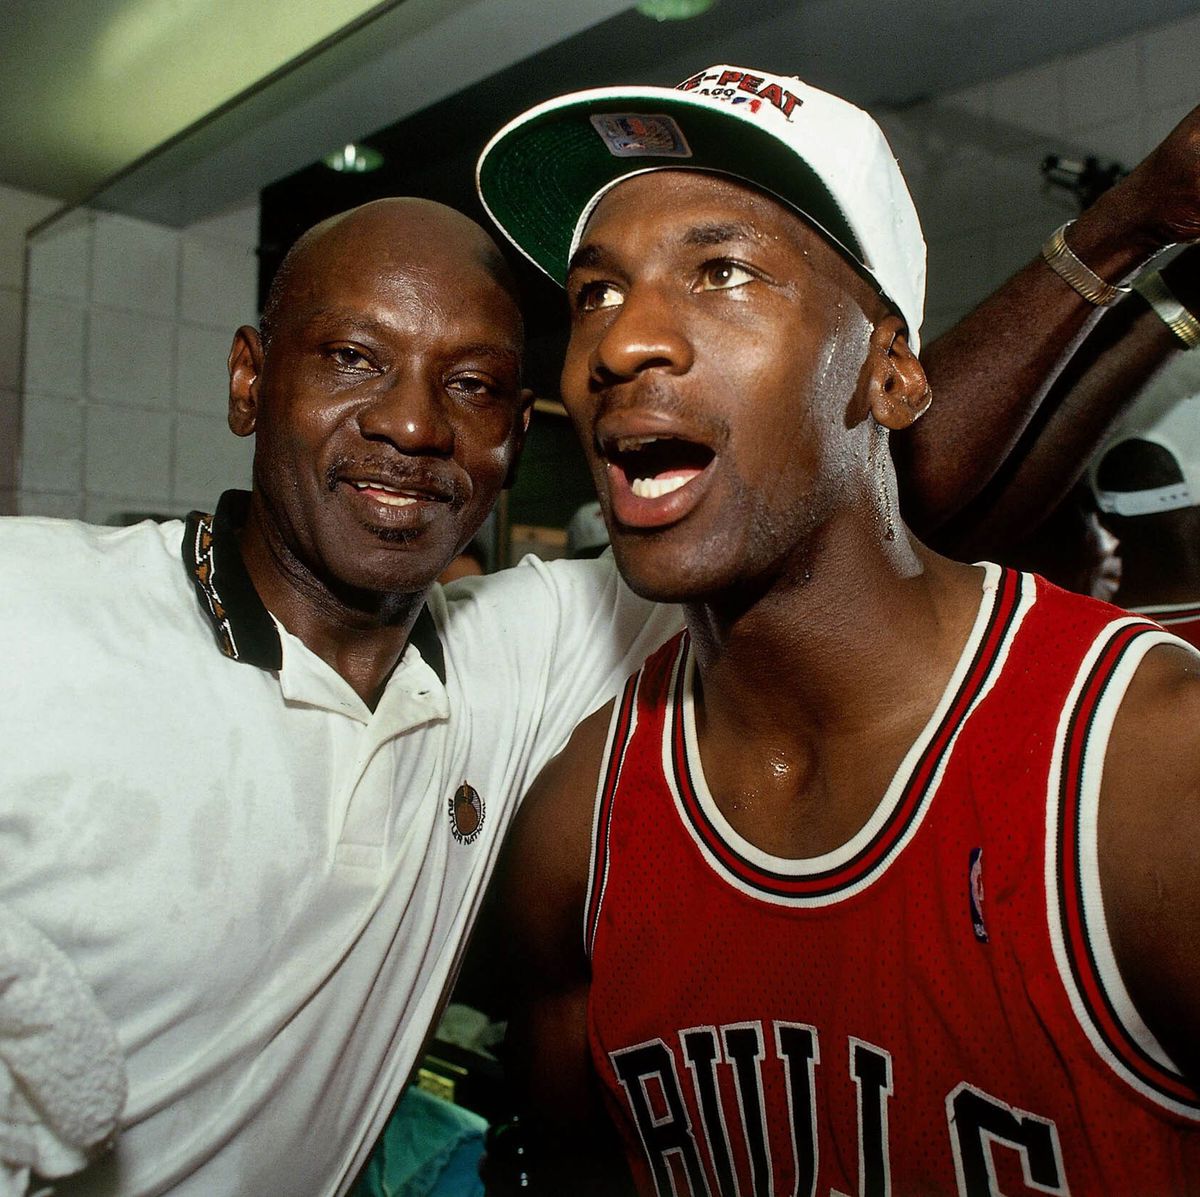 phoenix   june 20  michael jordan 23 of the chicago bulls celebrates winning the nba championship with his father after game six of the 1993 nba finals on june 20, 1993 at th america west arena in phoenix, arizona  the bulls won 99 98  note to user user expressly acknowledges and agrees that, by downloading andor using this photograph, user is consenting to the terms and conditions of the getty images license agreement mandatory copyright notice copyright 1993 nbae  photo by andrew d bernsteinnbae via getty images